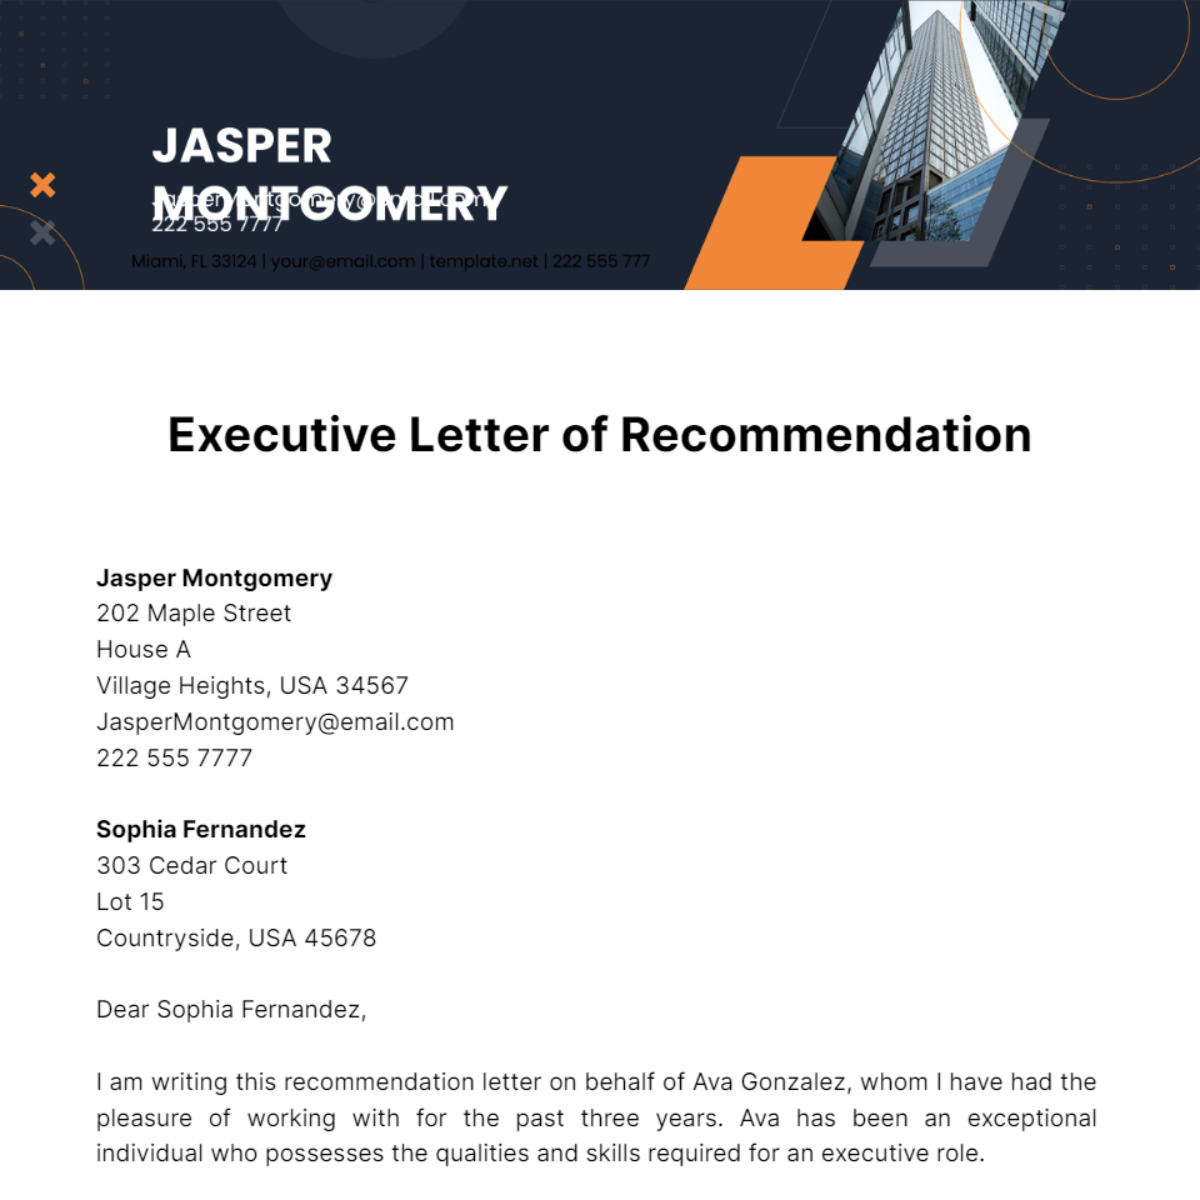 Executive Letter of Recommendation Template